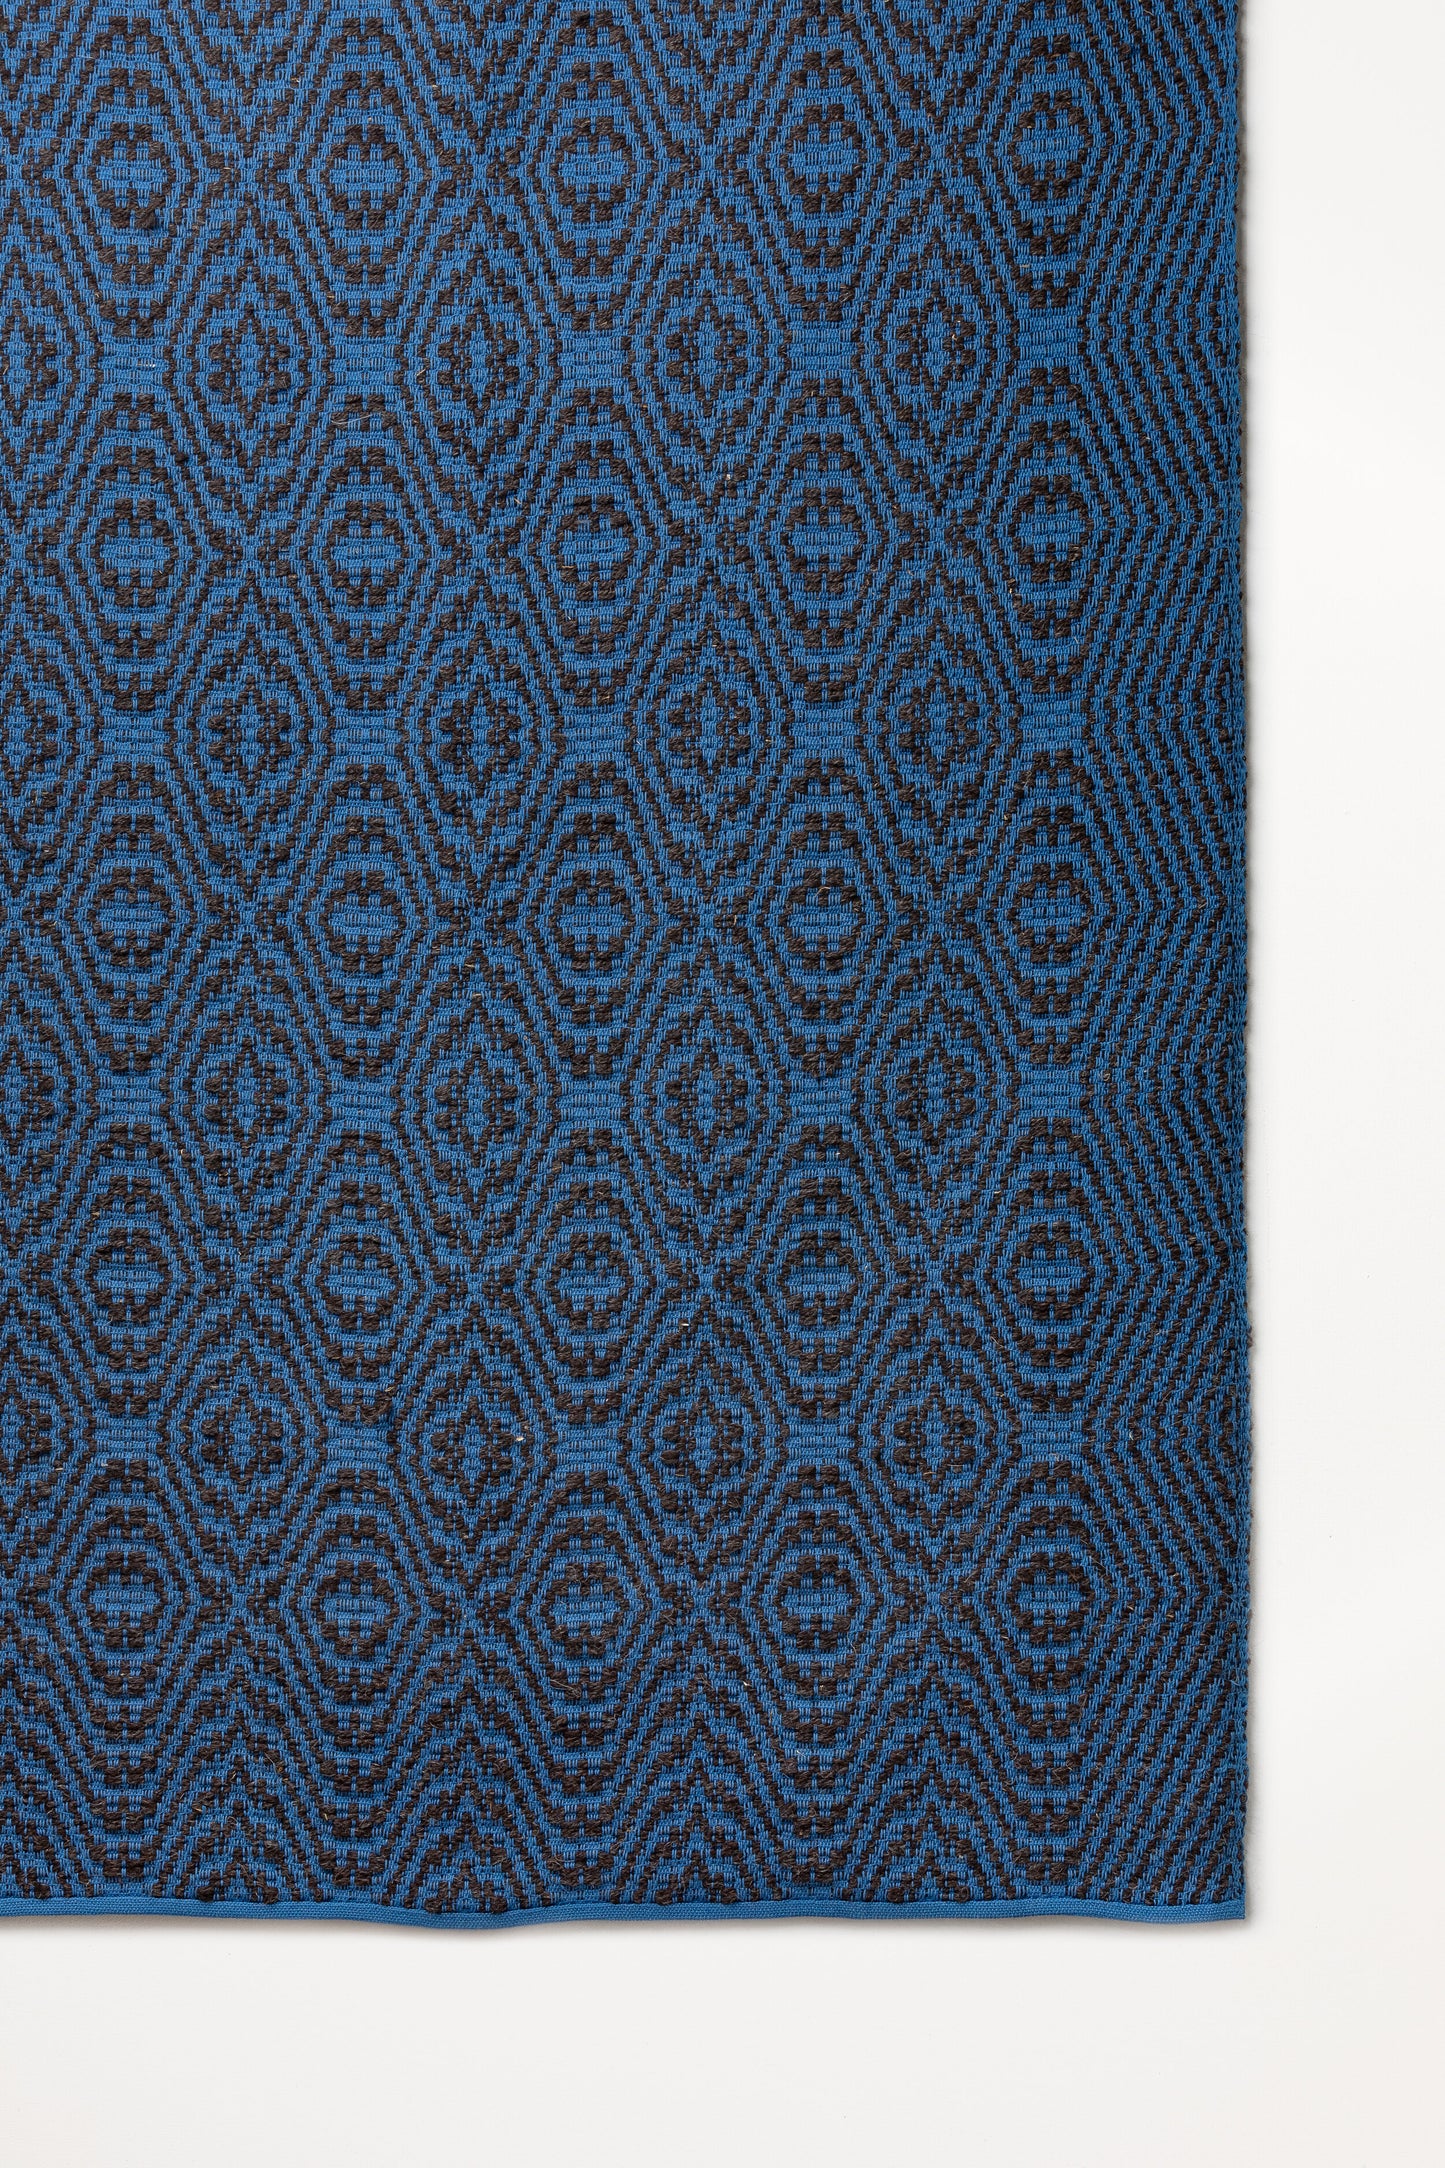 "Pinto melograno" Rug 80 x 190 cm in Royal Blue / Brown